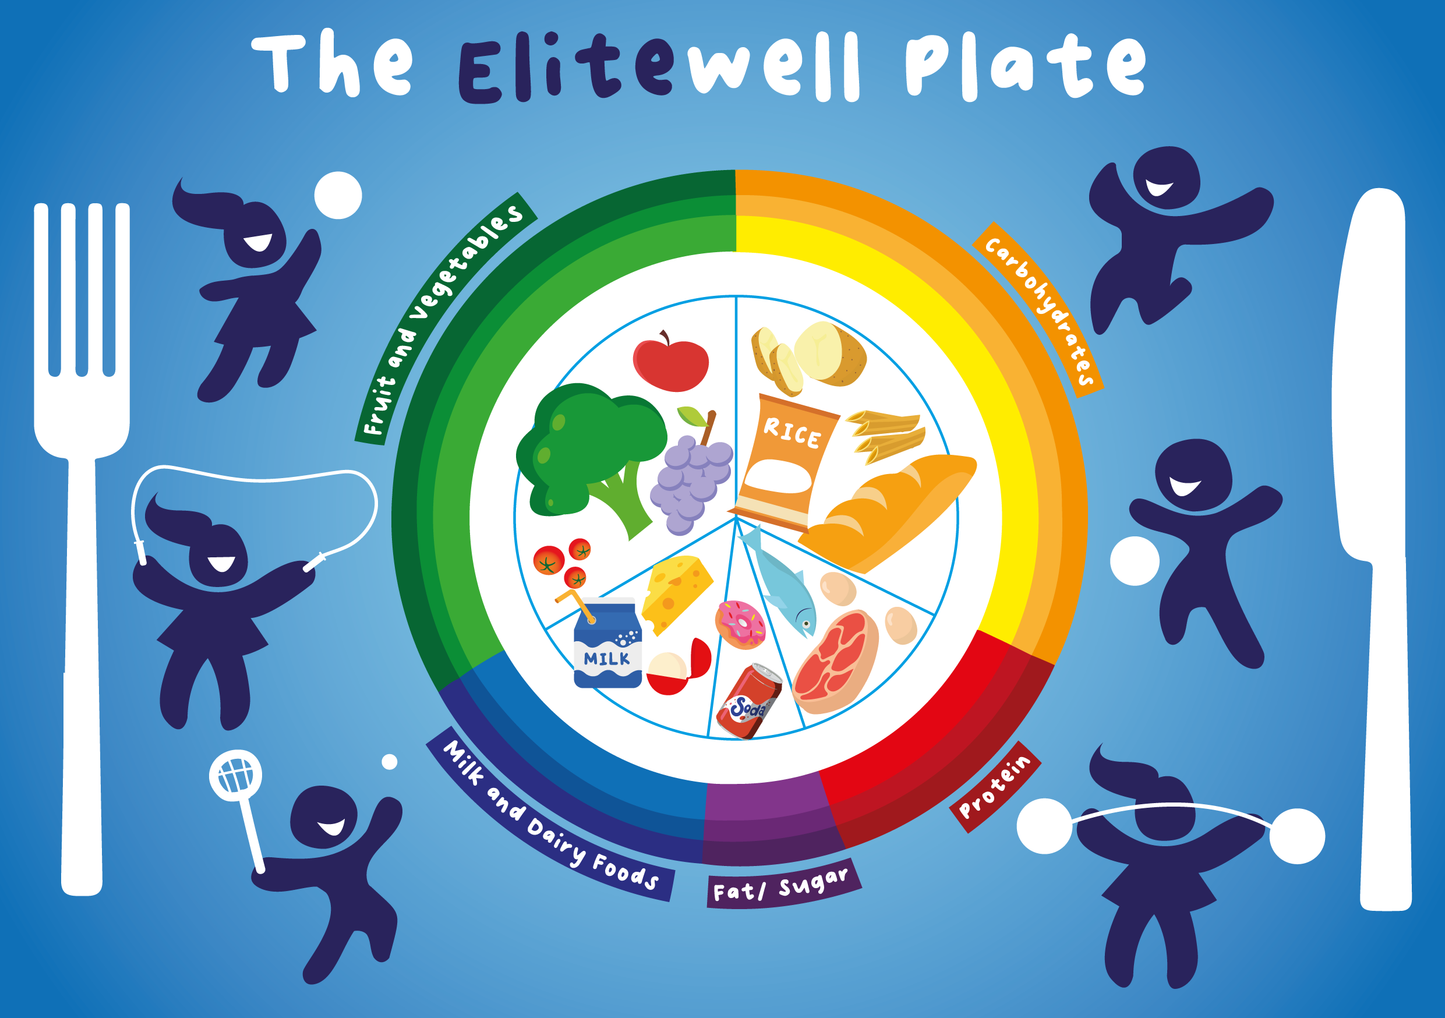 Elitewell plate showing correct food portions for a healthy balanced diet